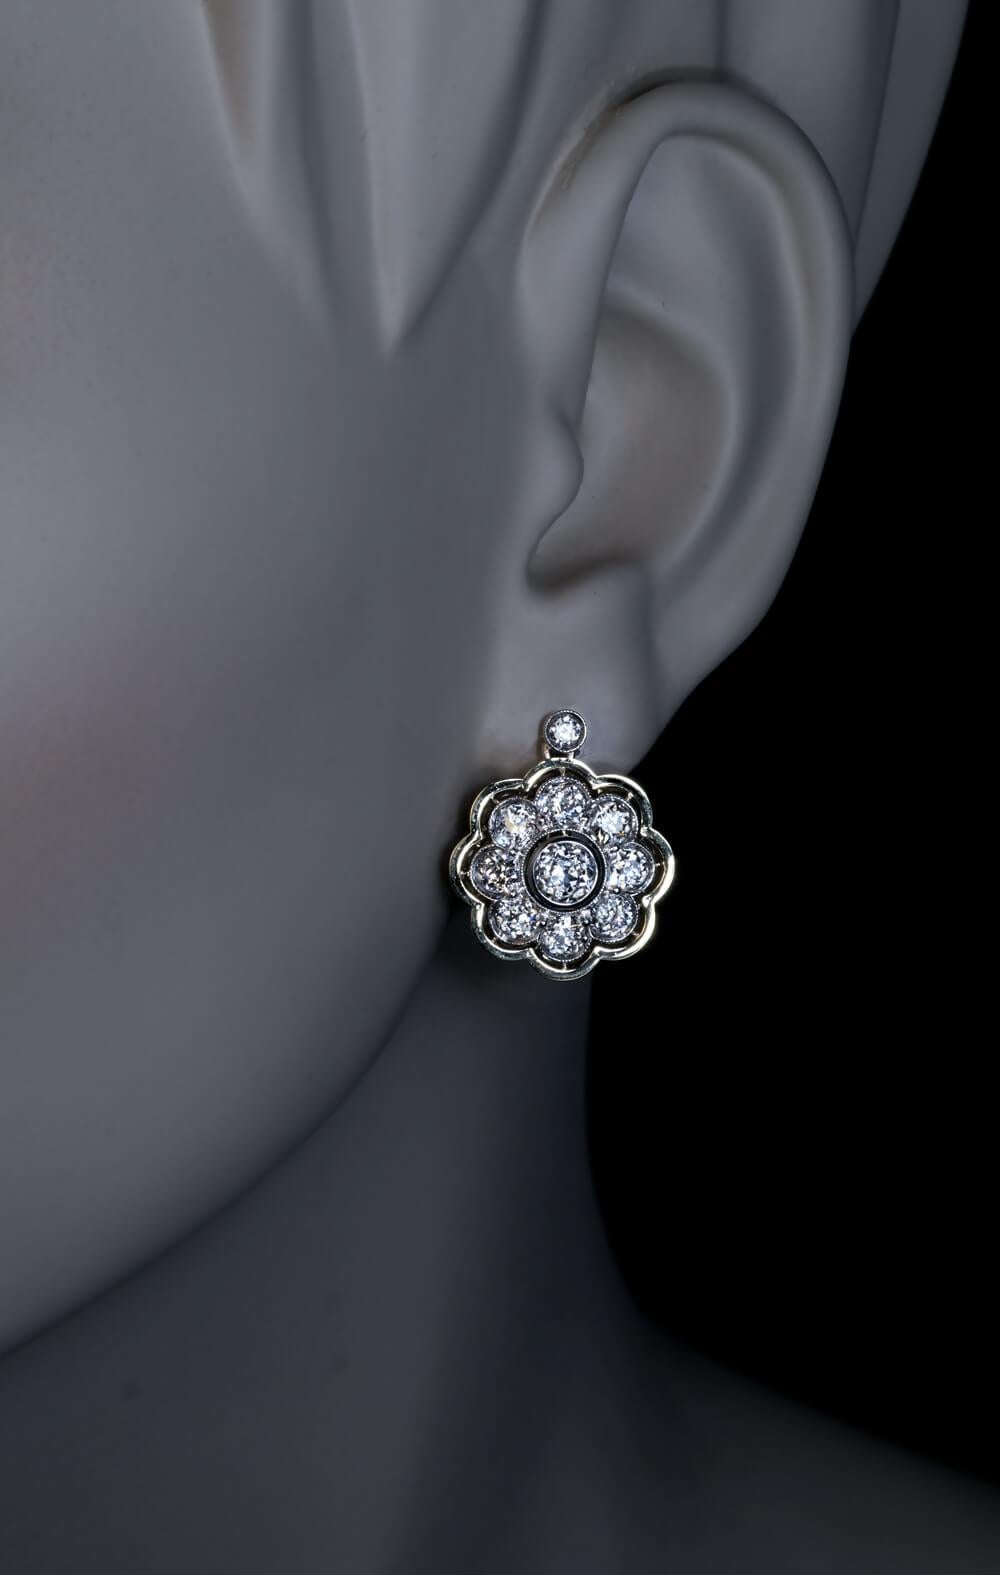 Circa 1920

These finely crafted 18K greenish-yellow gold and platinum cluster earrings are embellished with well-matched, bright white old mine cut and old European cut diamonds (E-F color, VS-SI clarity). The diamond and platinum clusters are